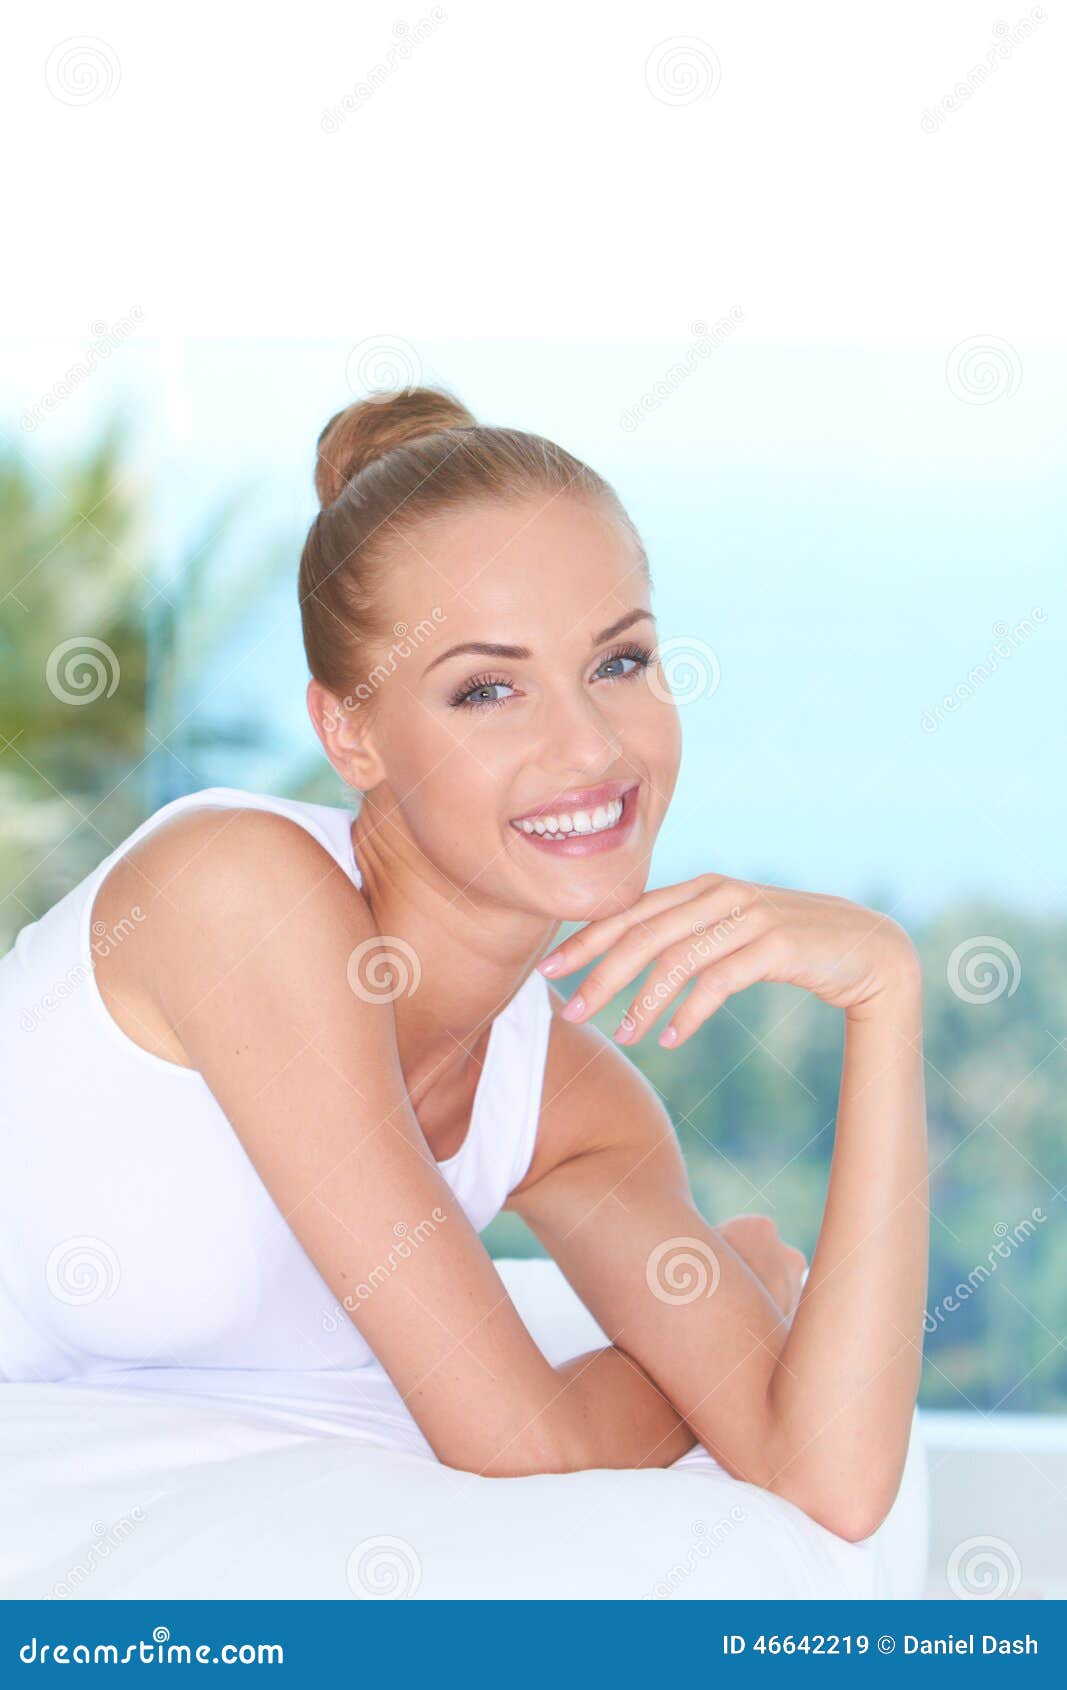 Attractive Smiling Woman Lying Prone On Bed Stock Image